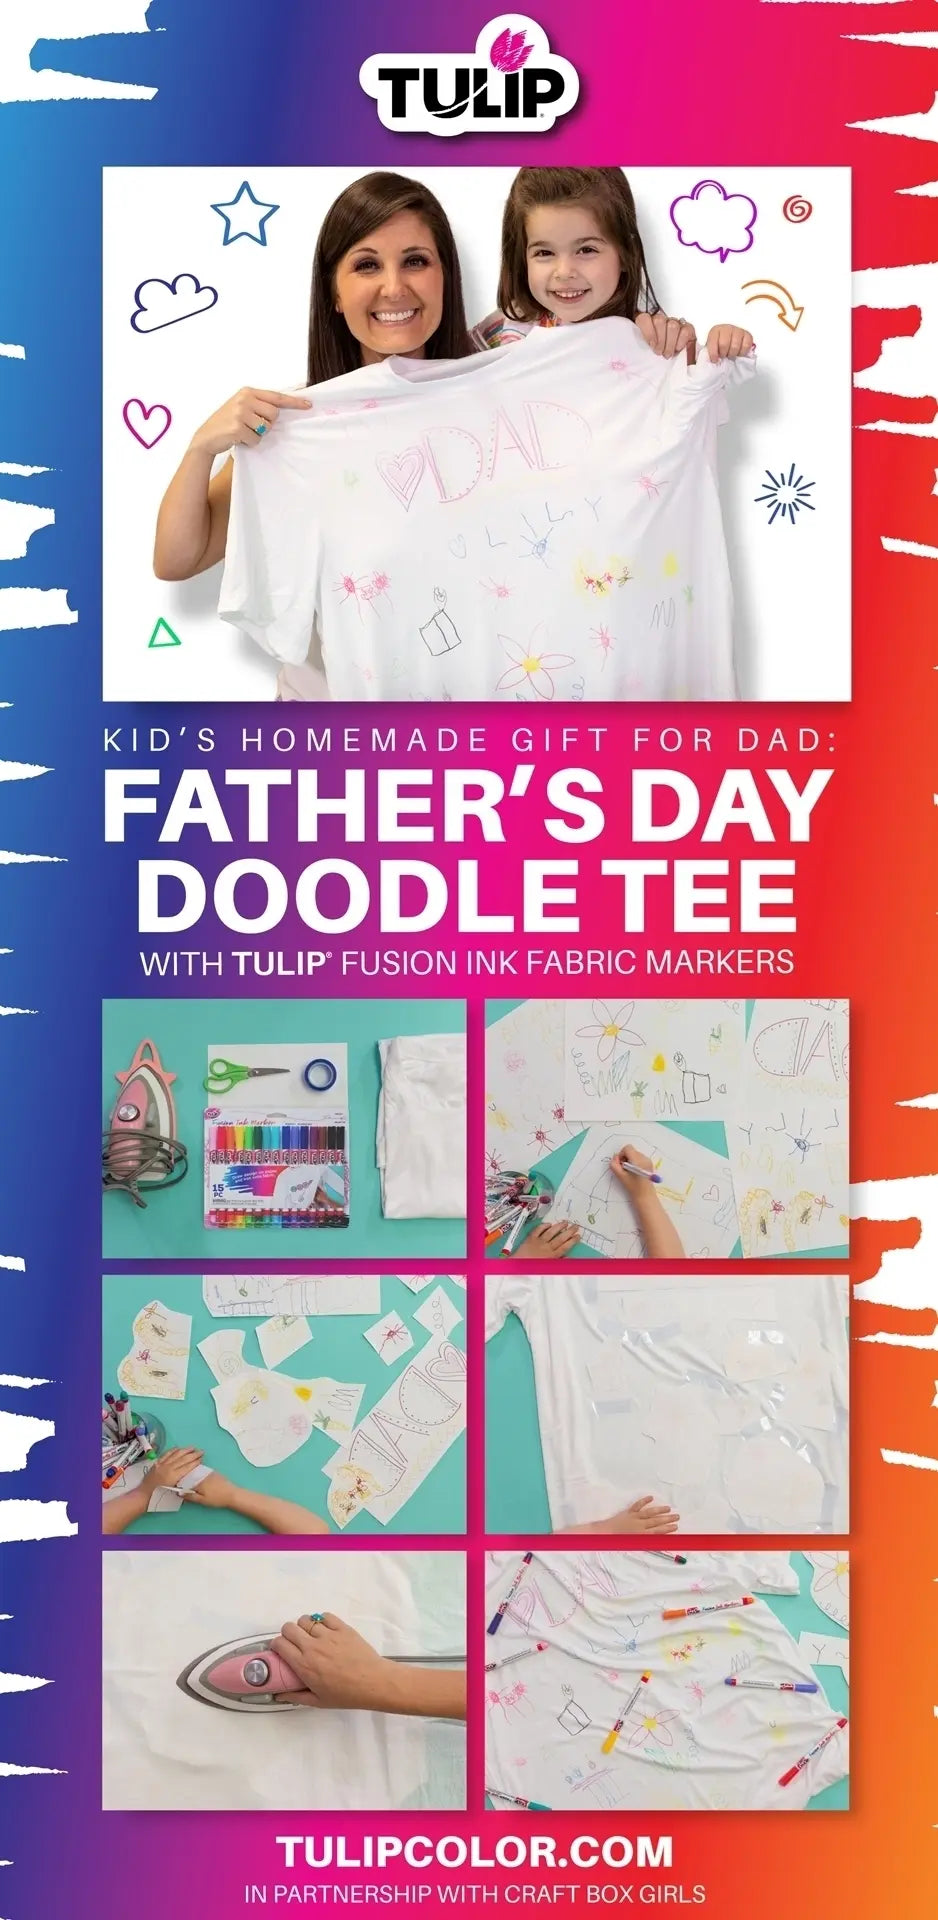 Kids’ Homemade Gift for Dad: Father’s Day Doodle Tee